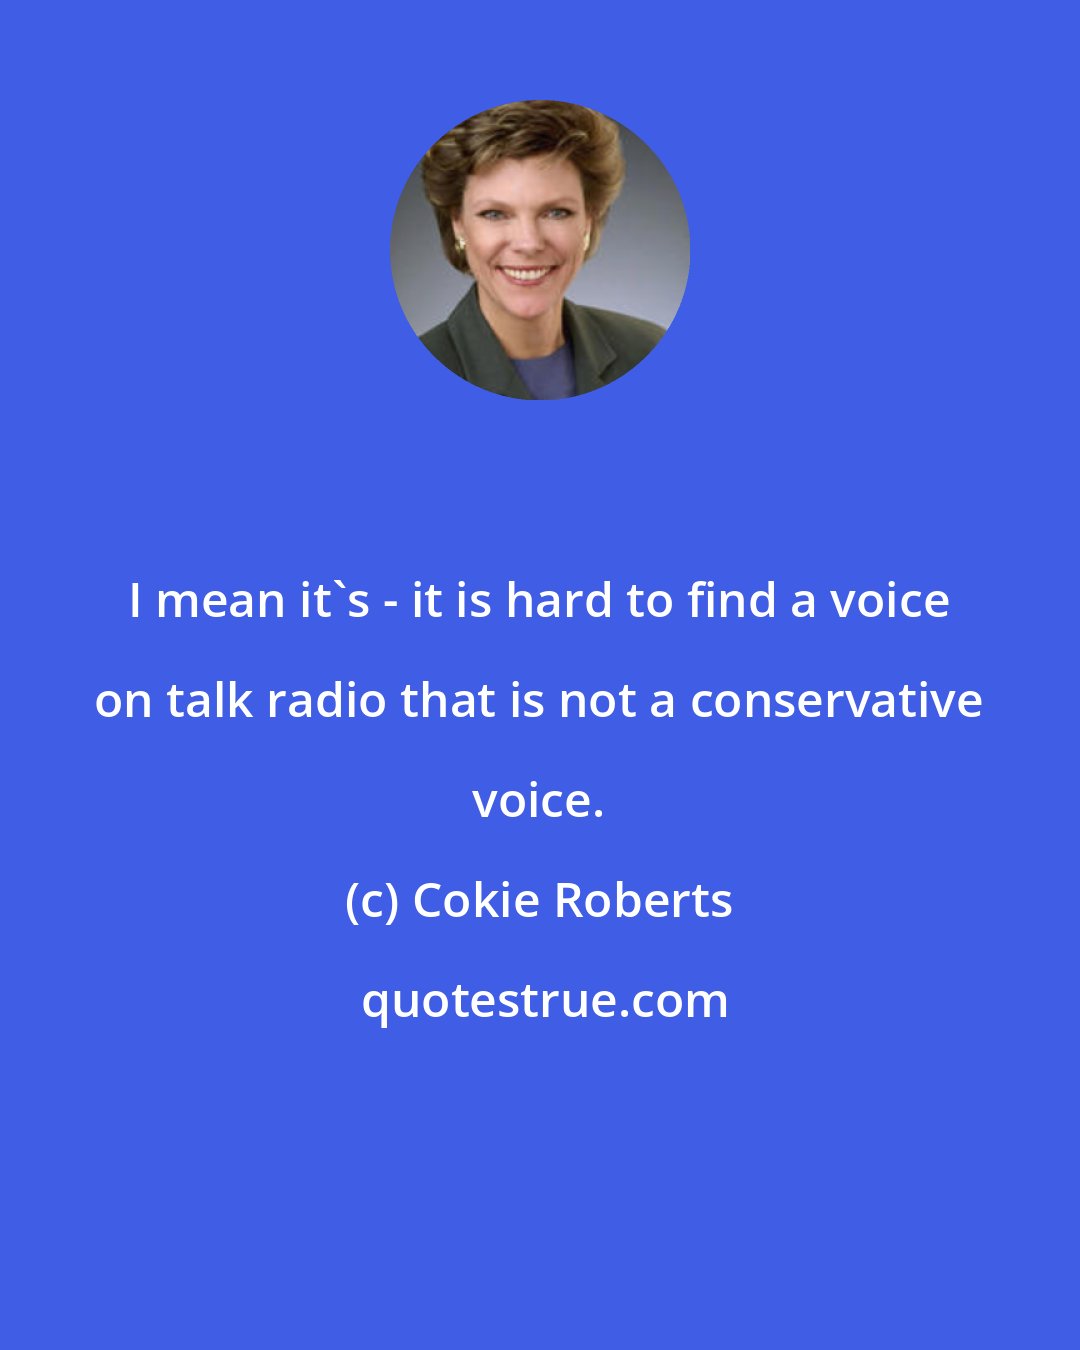 Cokie Roberts: I mean it's - it is hard to find a voice on talk radio that is not a conservative voice.